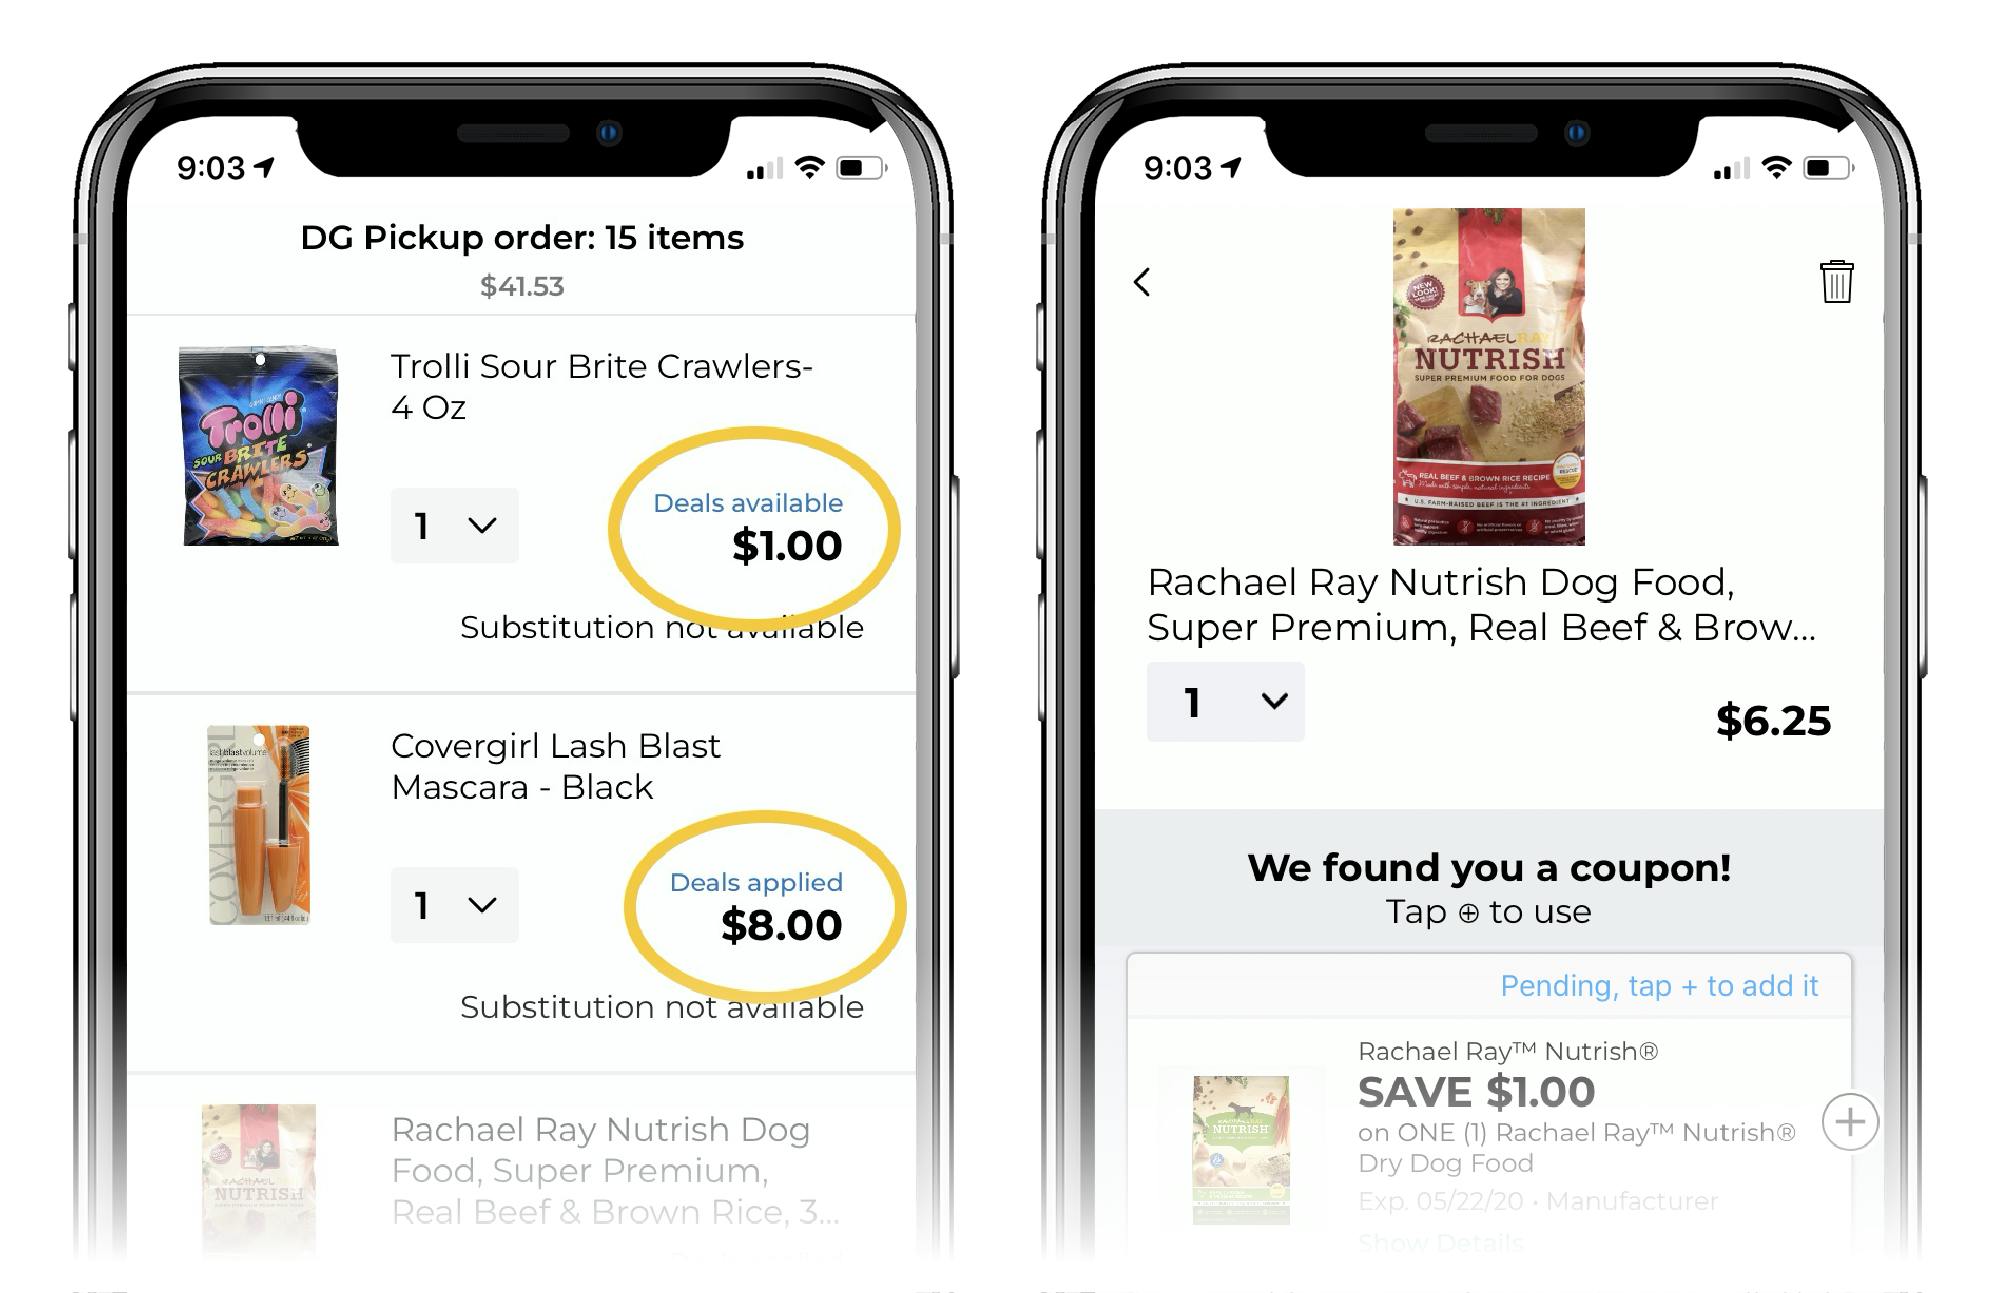 phone screen shows one dollar coupons available and applied to order